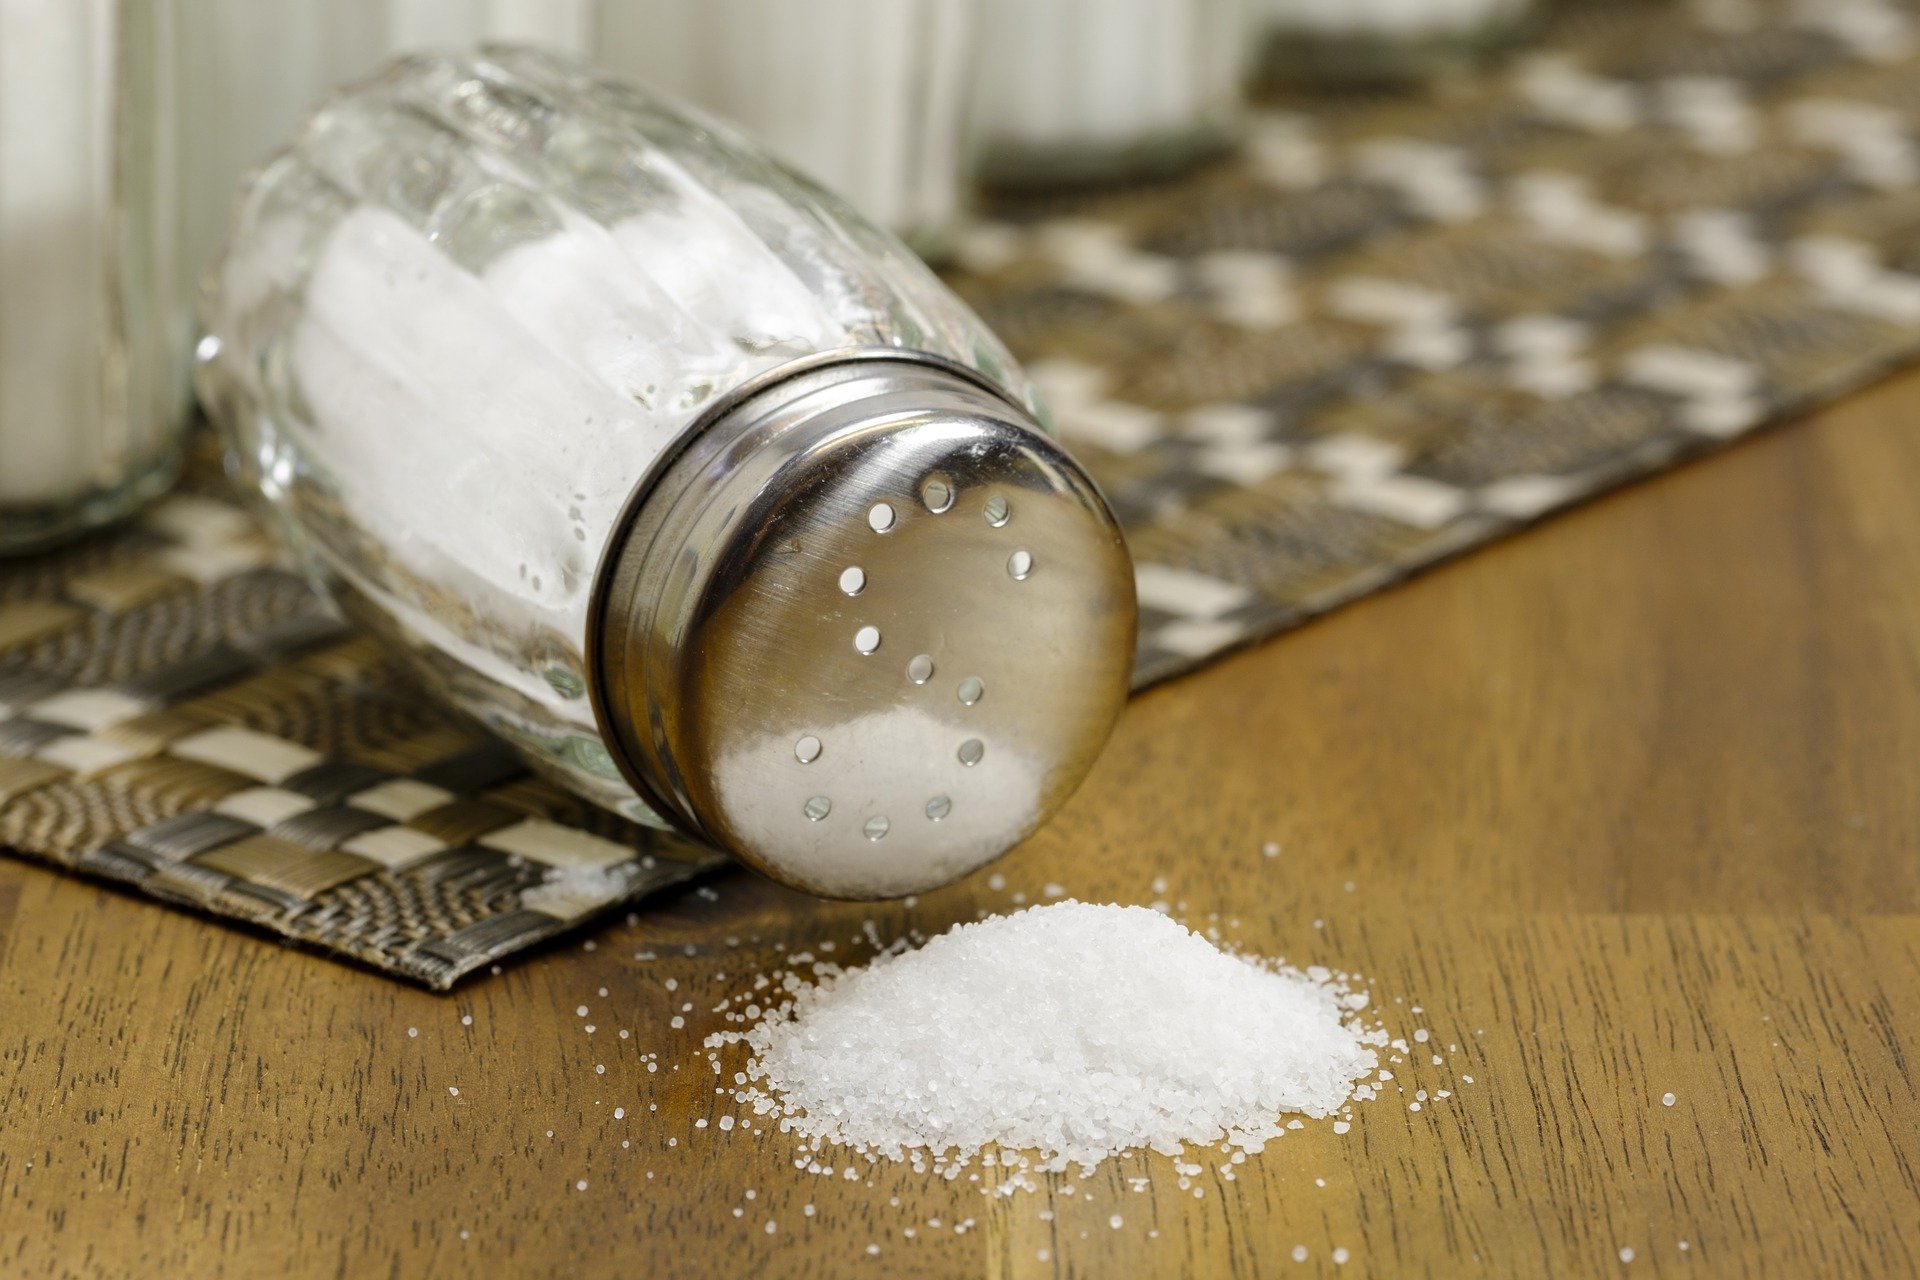 Too much salt affects the immune system